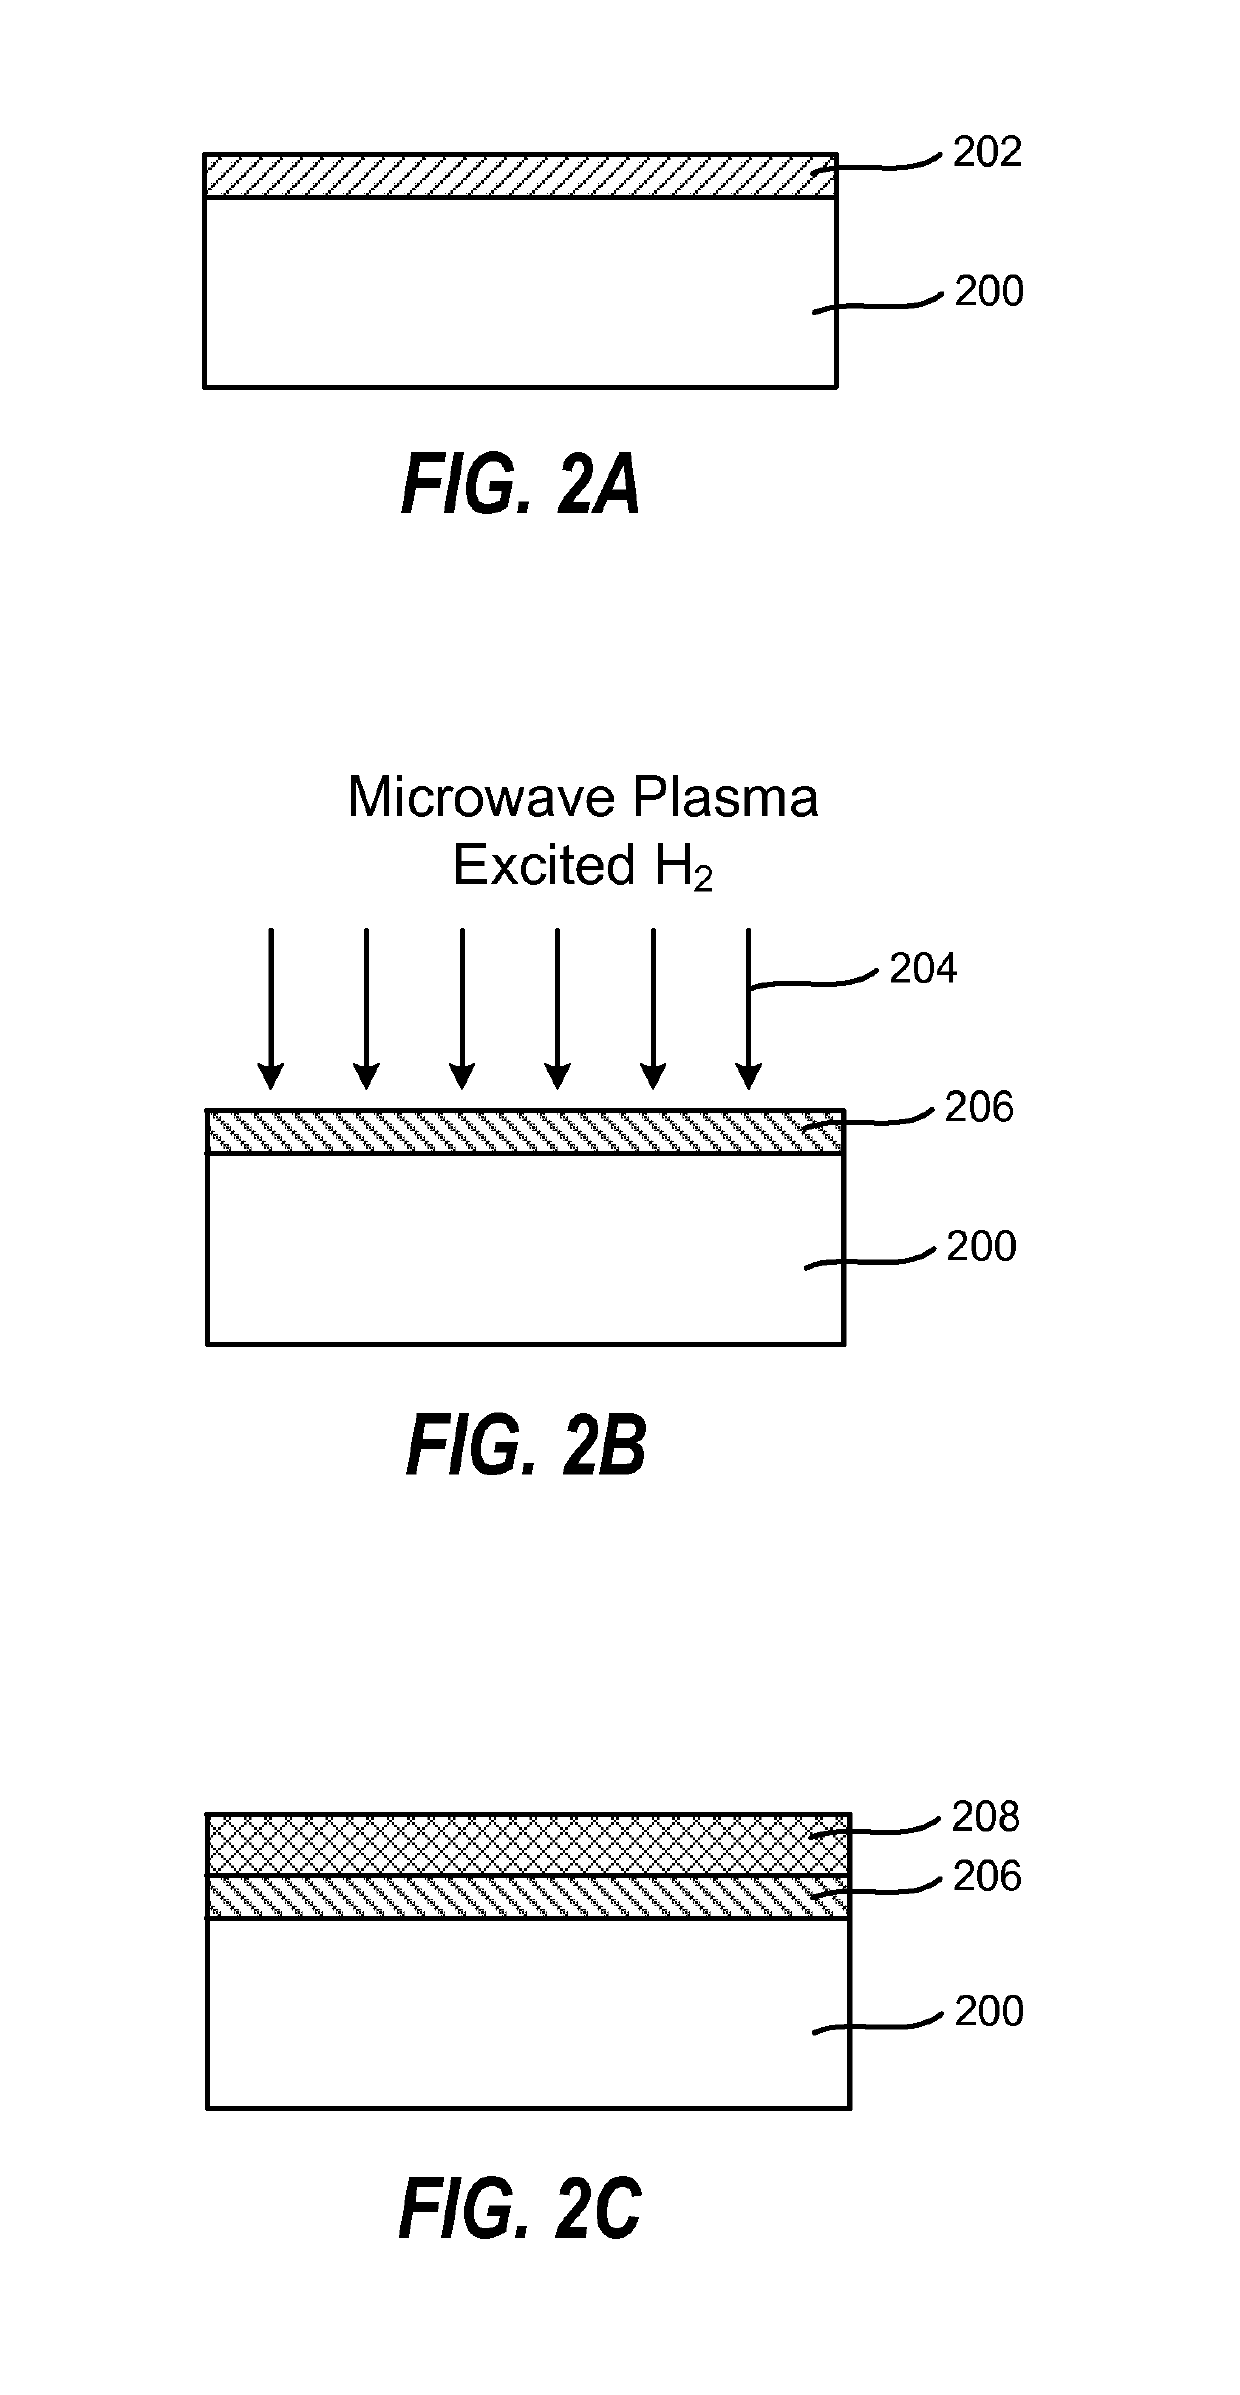 Method of enhancing high-k film nucleation rate and electrical mobility in a semiconductor device by microwave plasma treatment